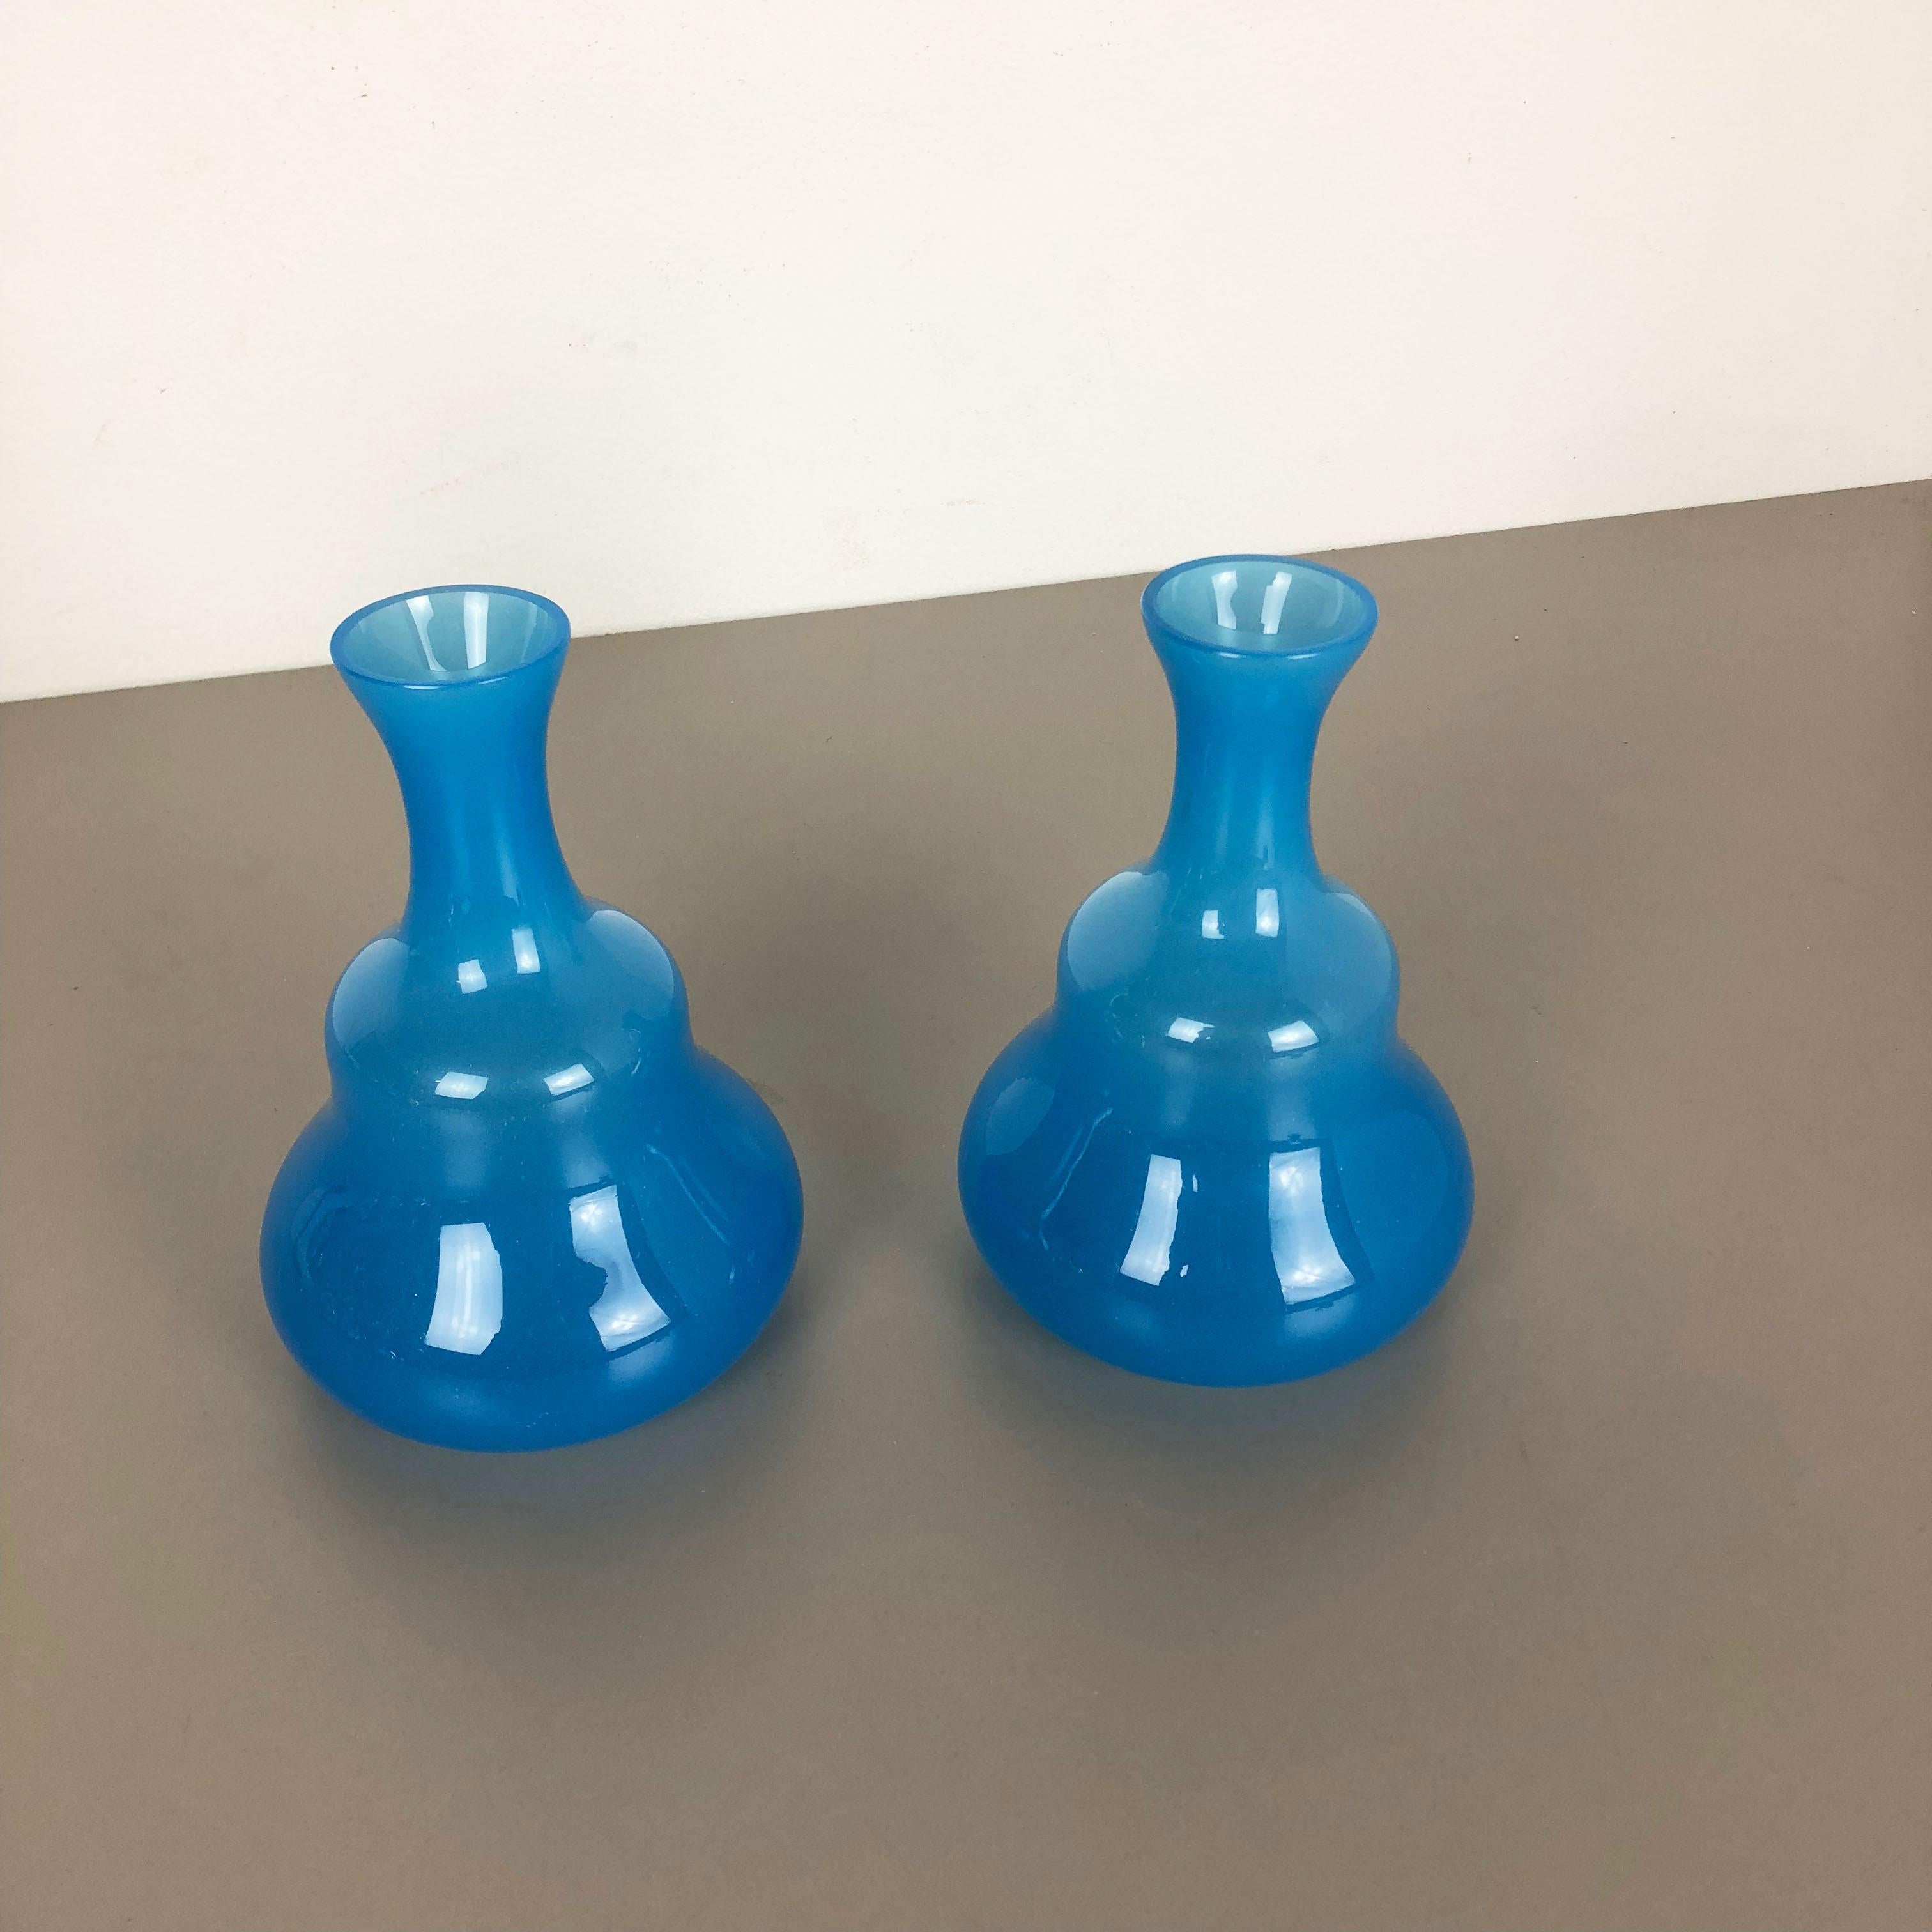 Mid-Century Modern Set of 2 New Old Stock Blue Murano Opaline Glass Vases by Gino Cenedese, 1960s